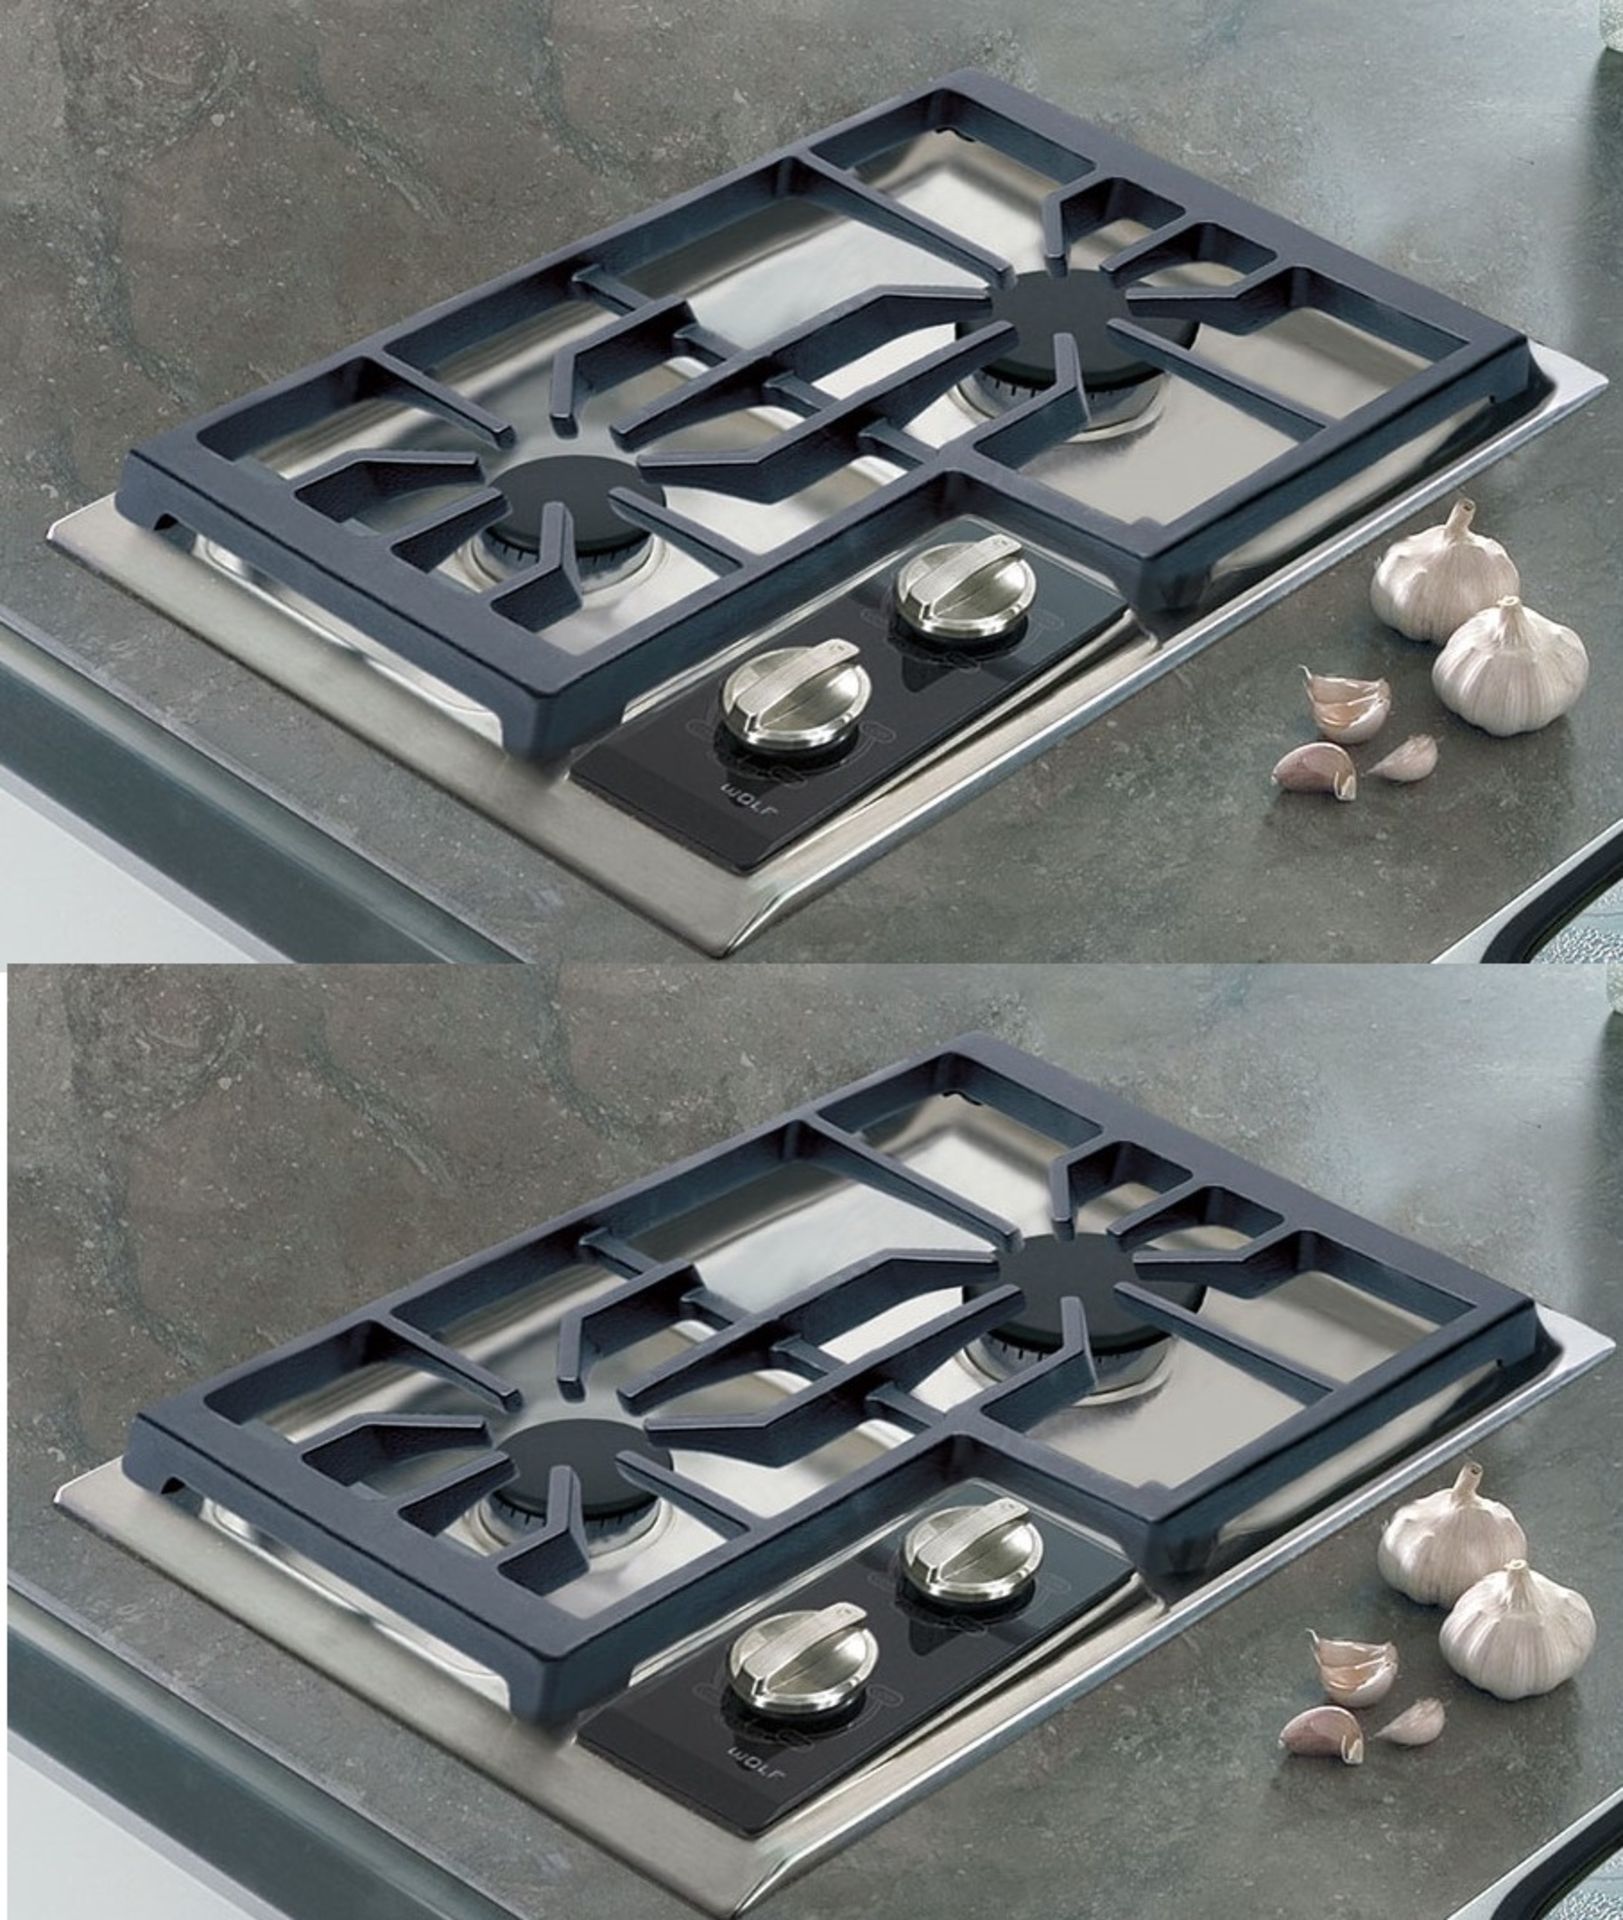 2 x Wolf Integrated Gas 15" Cook Top Twin Burners - Model CT15/S - Stainless Steel Finish - 15 x